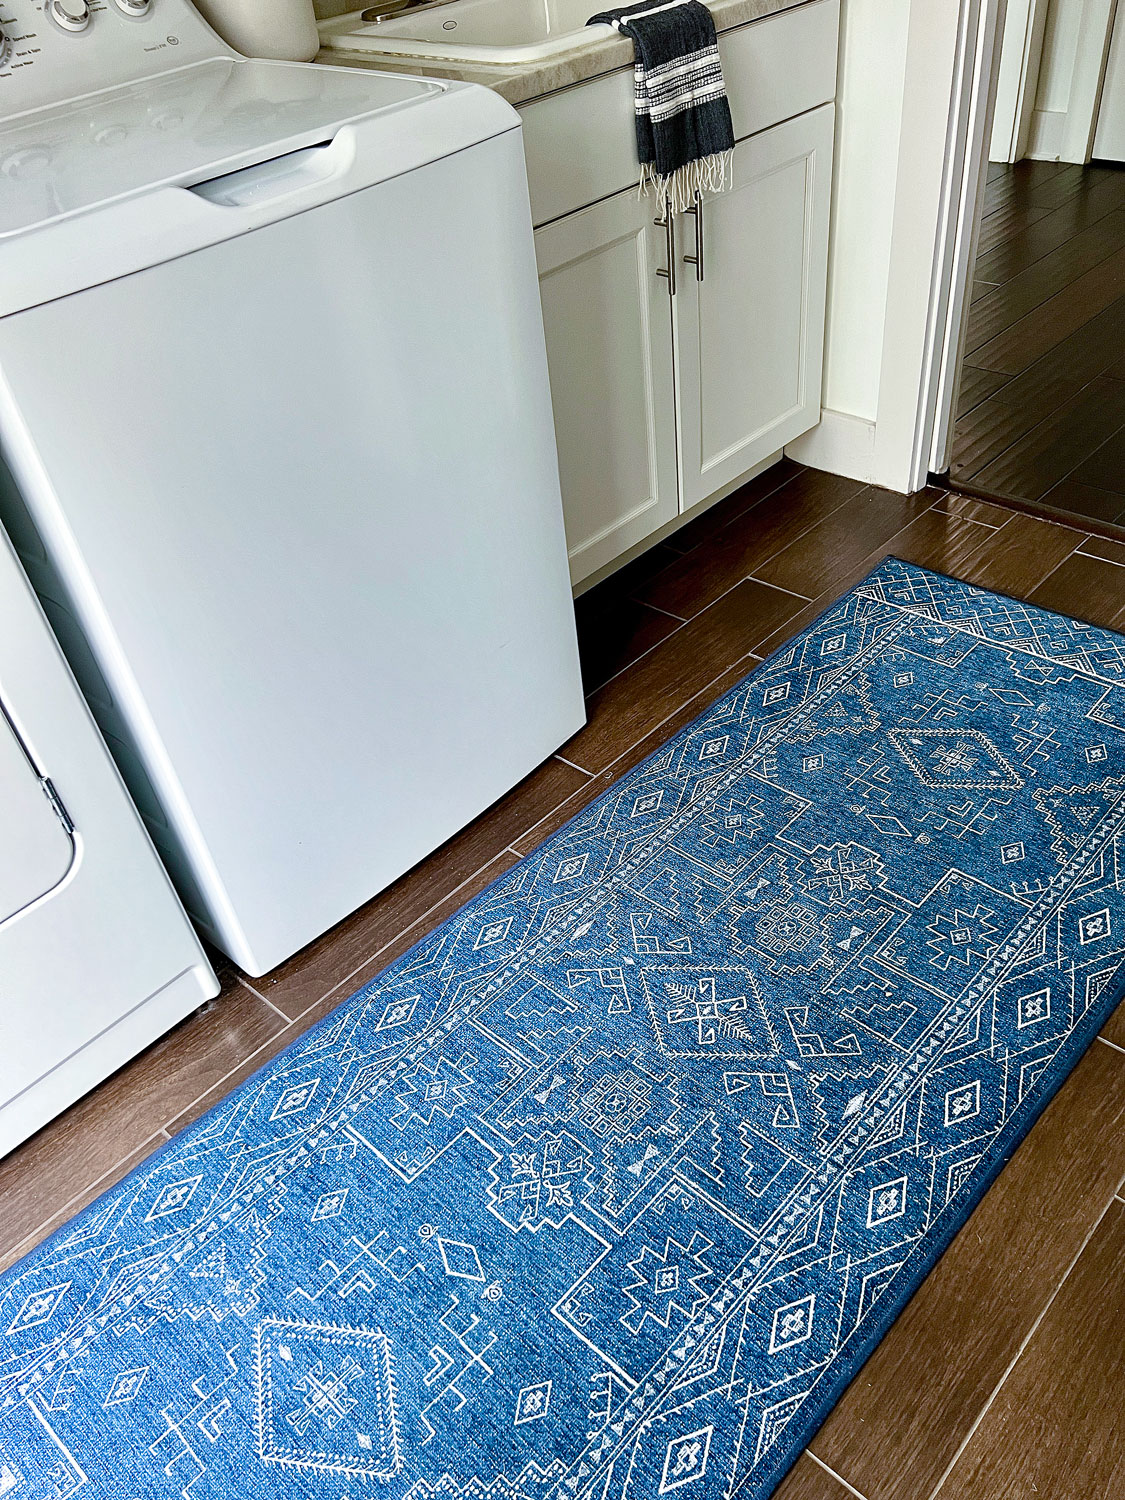 Laundry Room Simple Styling with a washable rug